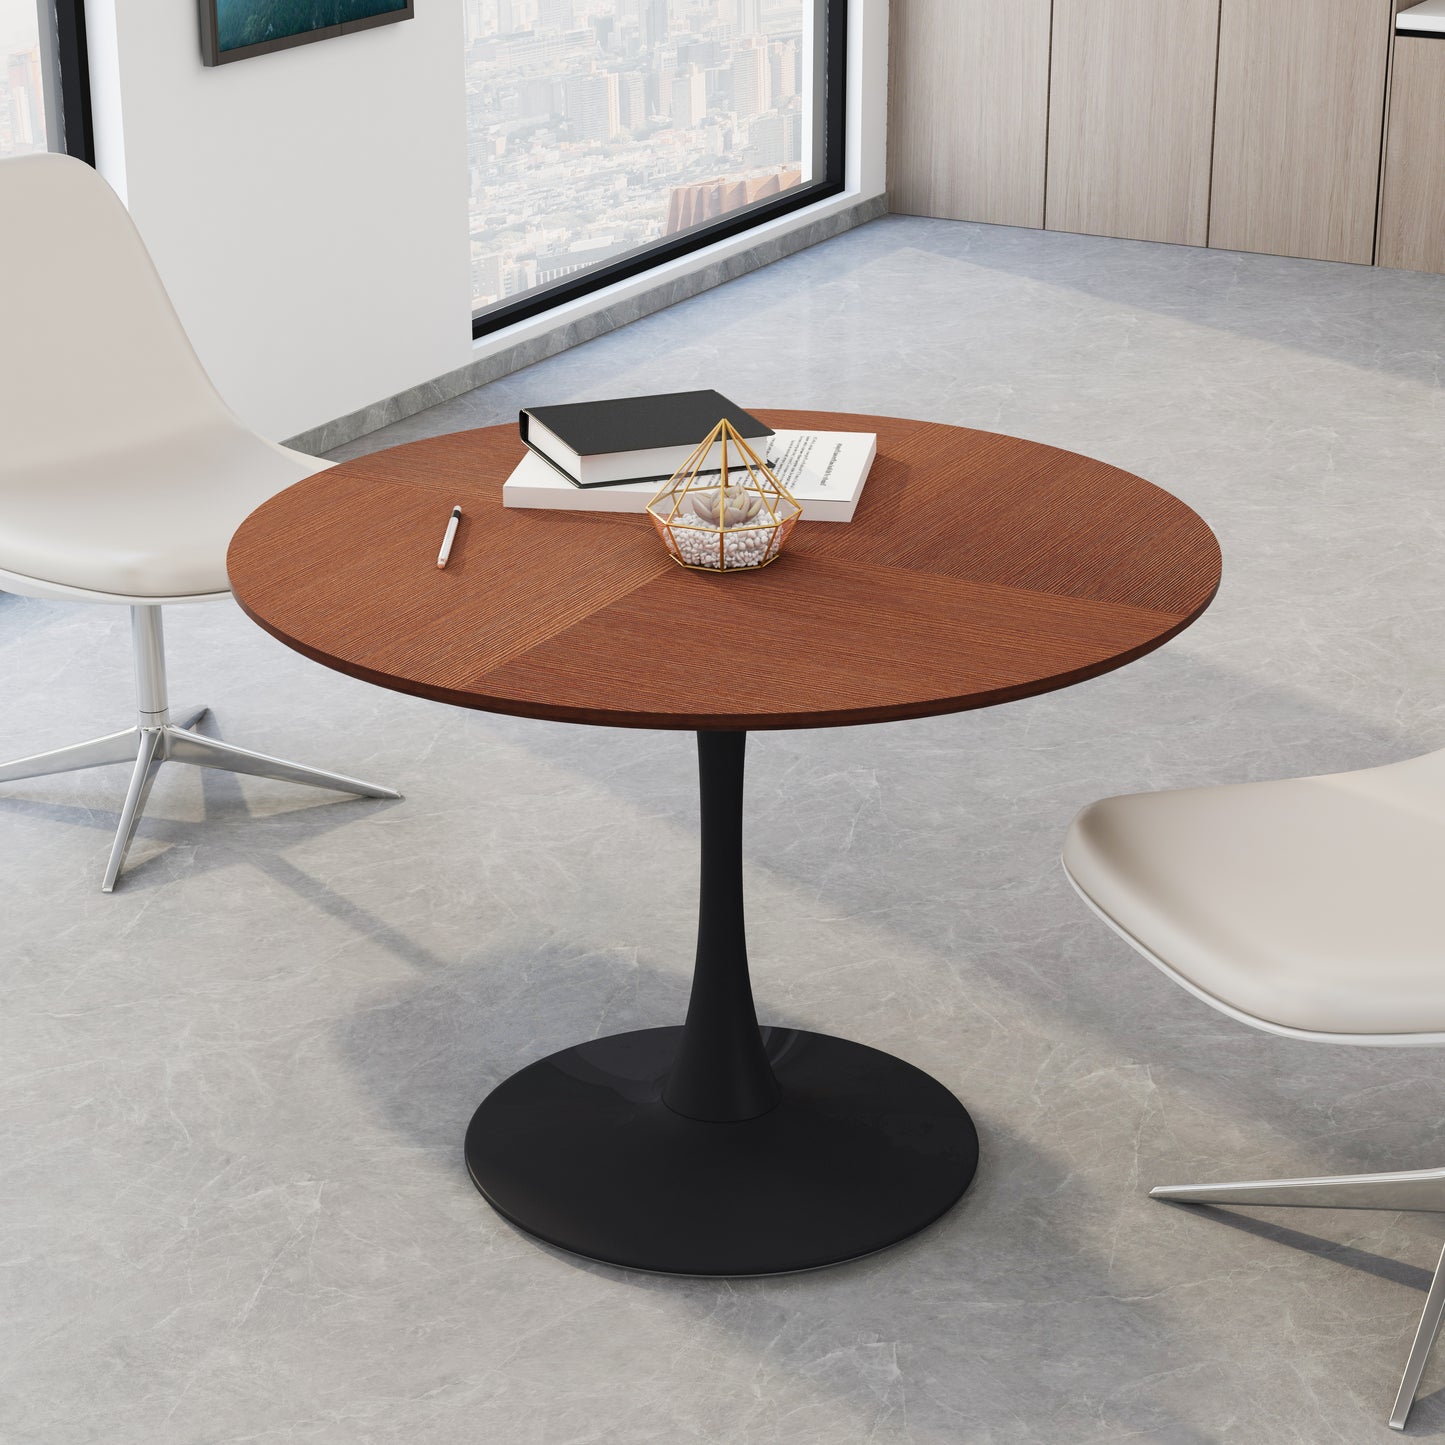 42"Modern Round Dining Table with Printed OAK Color Grain Table Top,Metal Base Dining Table, End Table Leisure Coffee Table